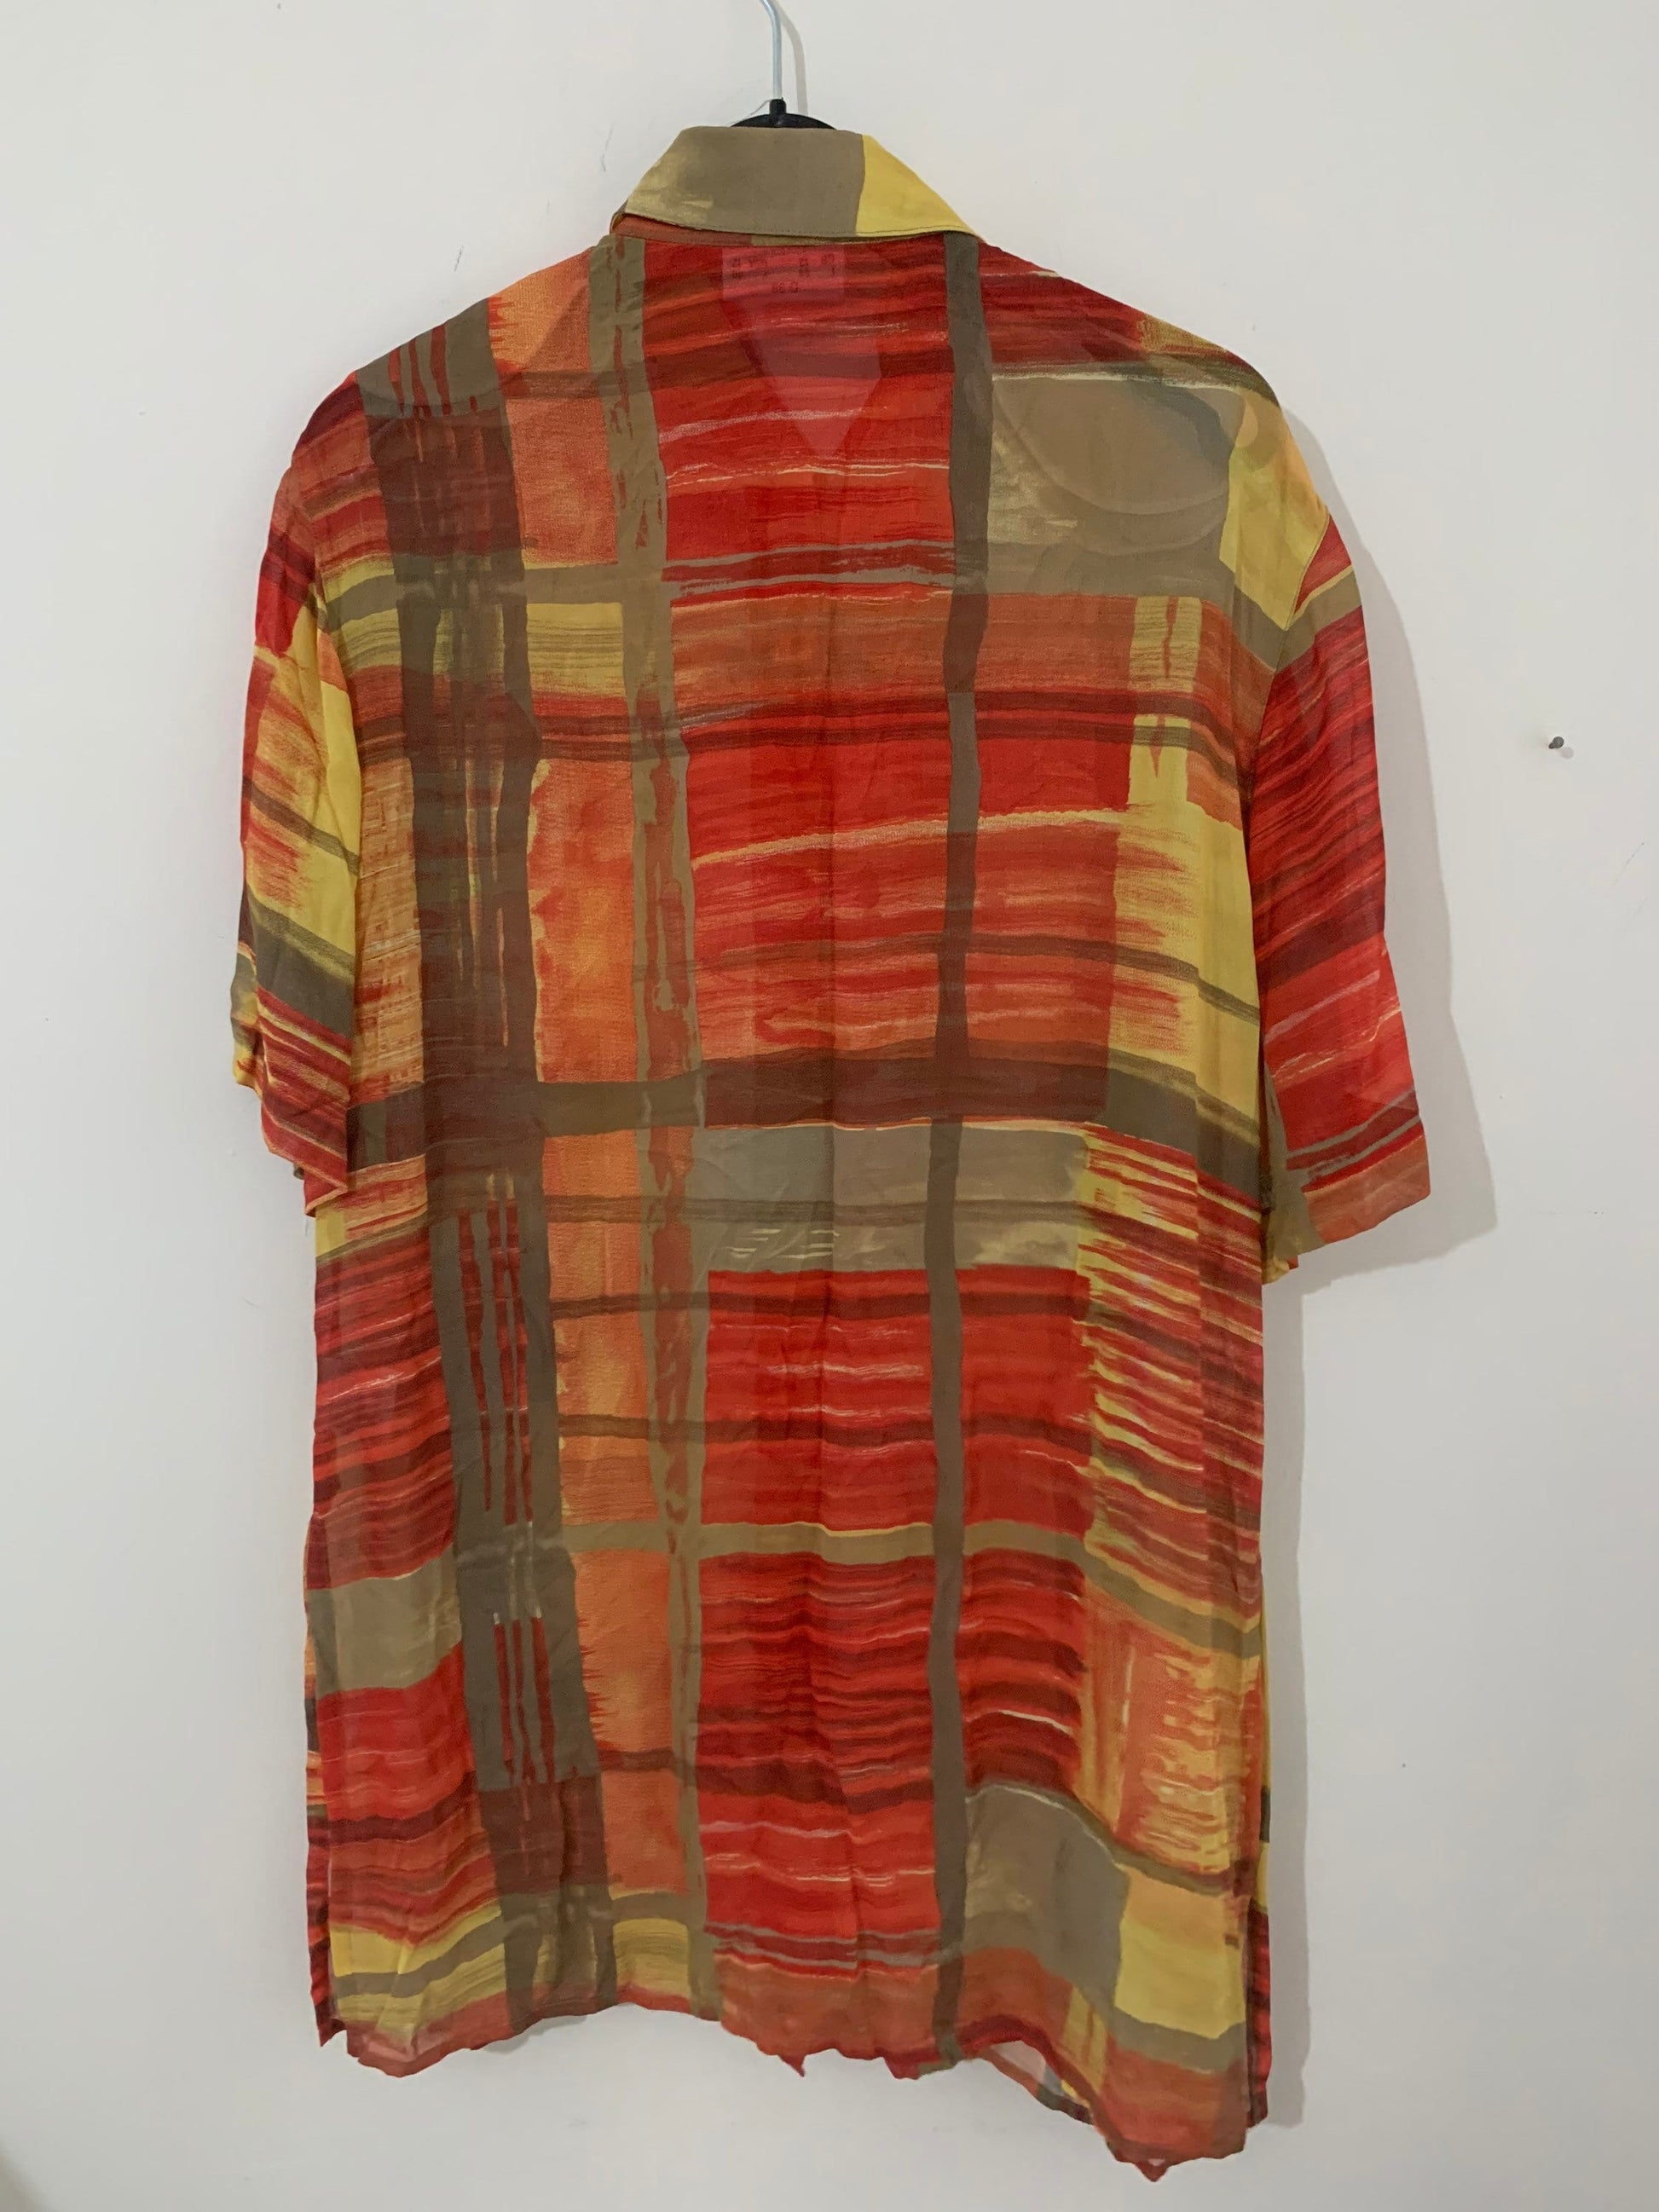 Red Orange check Vintage Blouse Semi Sheer Red Button Through Boxy short Sleeves - Size 14